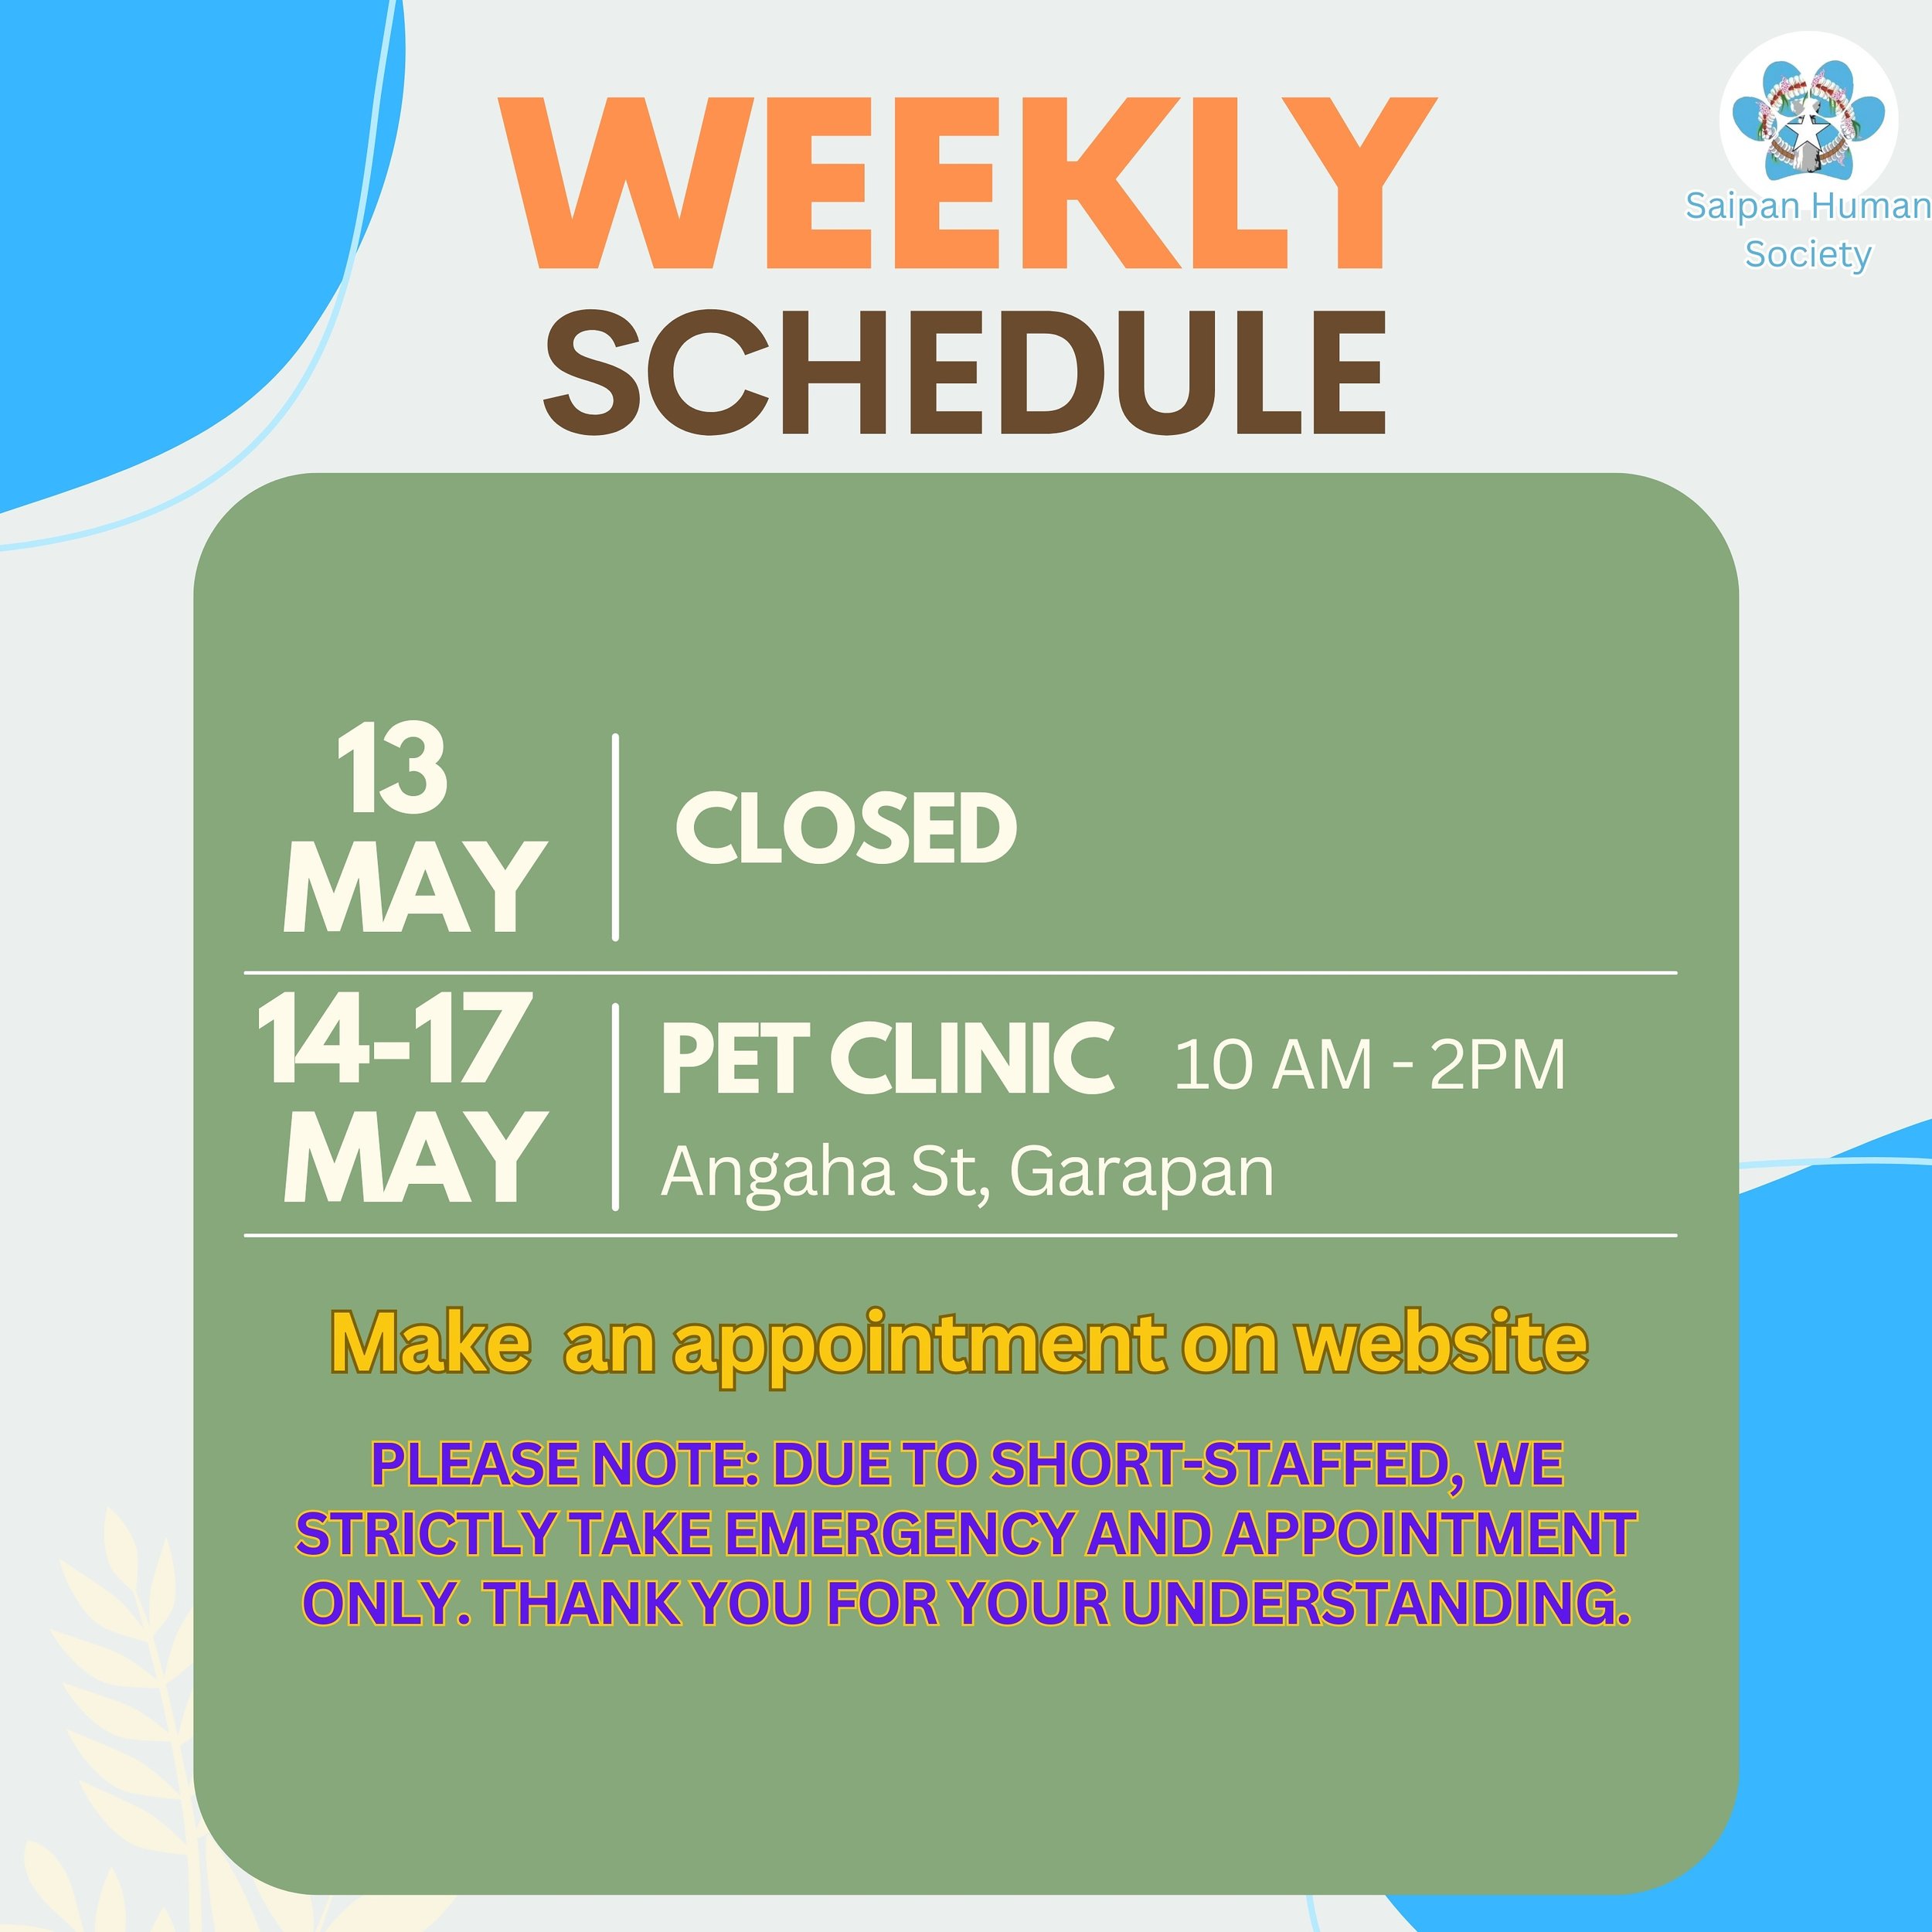 🏡 New Location Alert! This week&rsquo;s Clinic Schedule: 🐶🐾

🚪May 13 (Monday): CLOSED 
🗓️May 14-17 (Tuesday - Friday): OPEN from 10 AM - 2 PM At Angaha St, Garapan.

Due to short-staff, we&rsquo;re accepting appointments and emergencies ONLY 🚨P